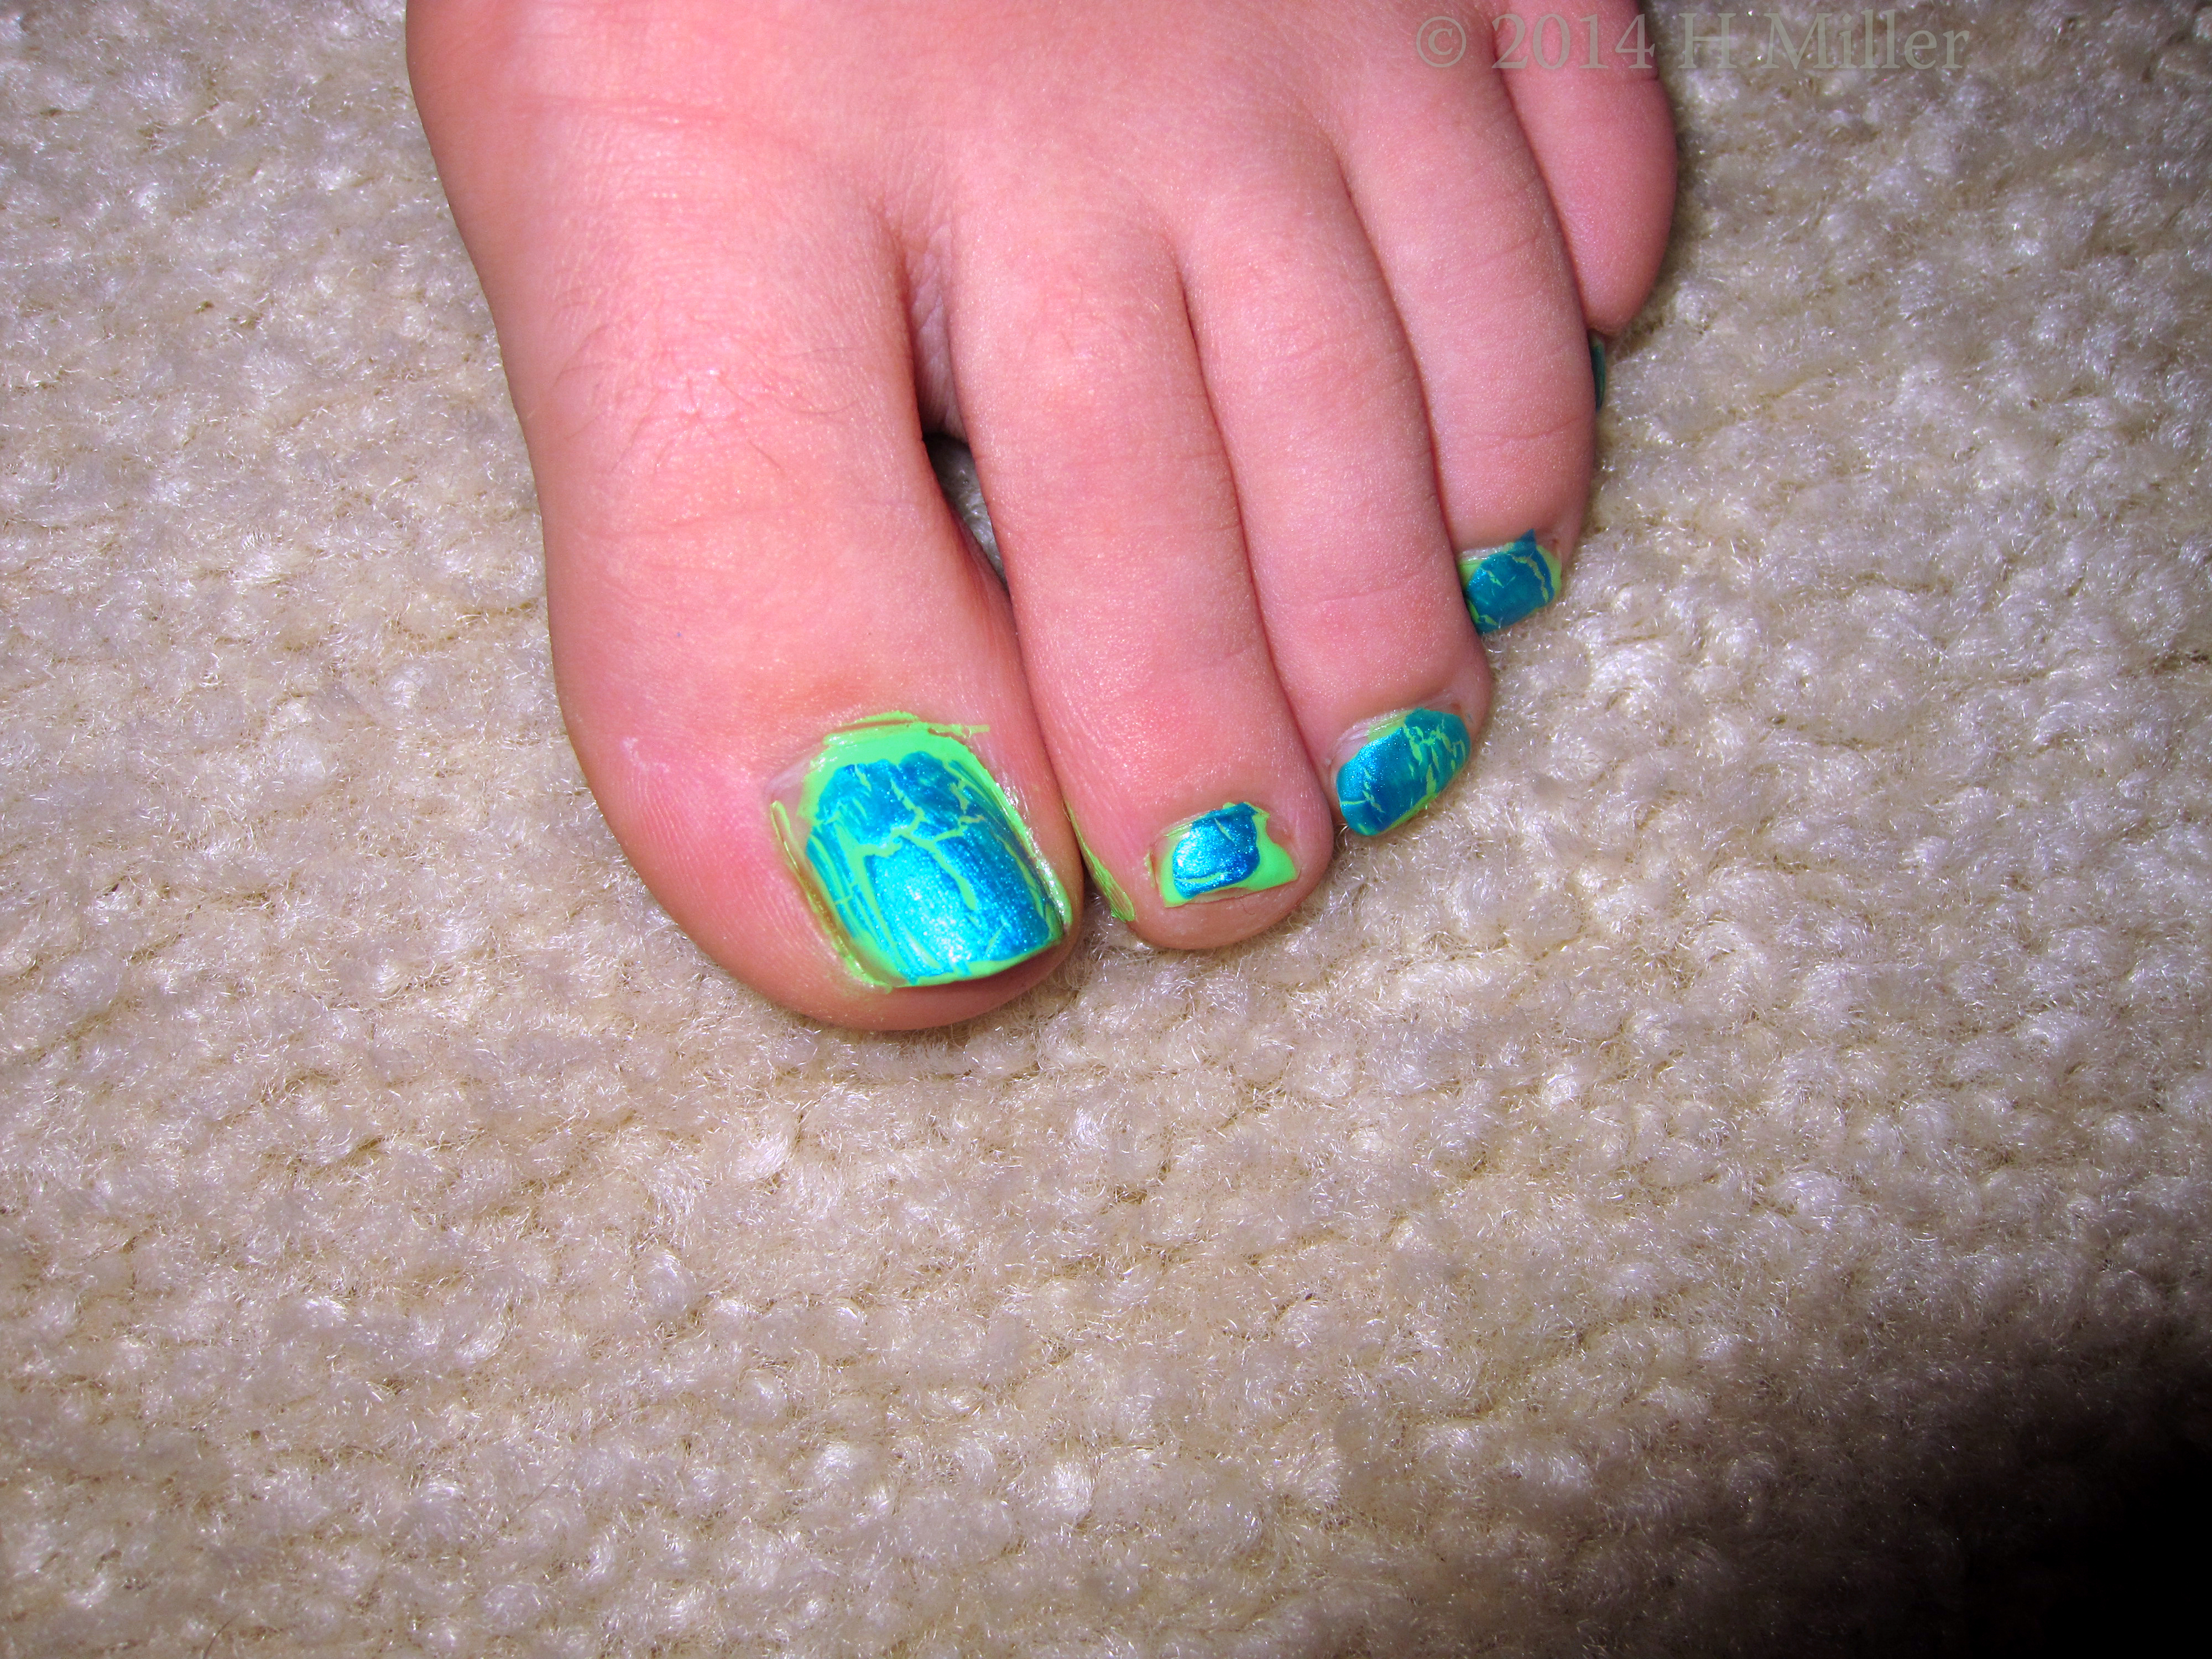 Blue And Green Nail Polish Blend Well. 